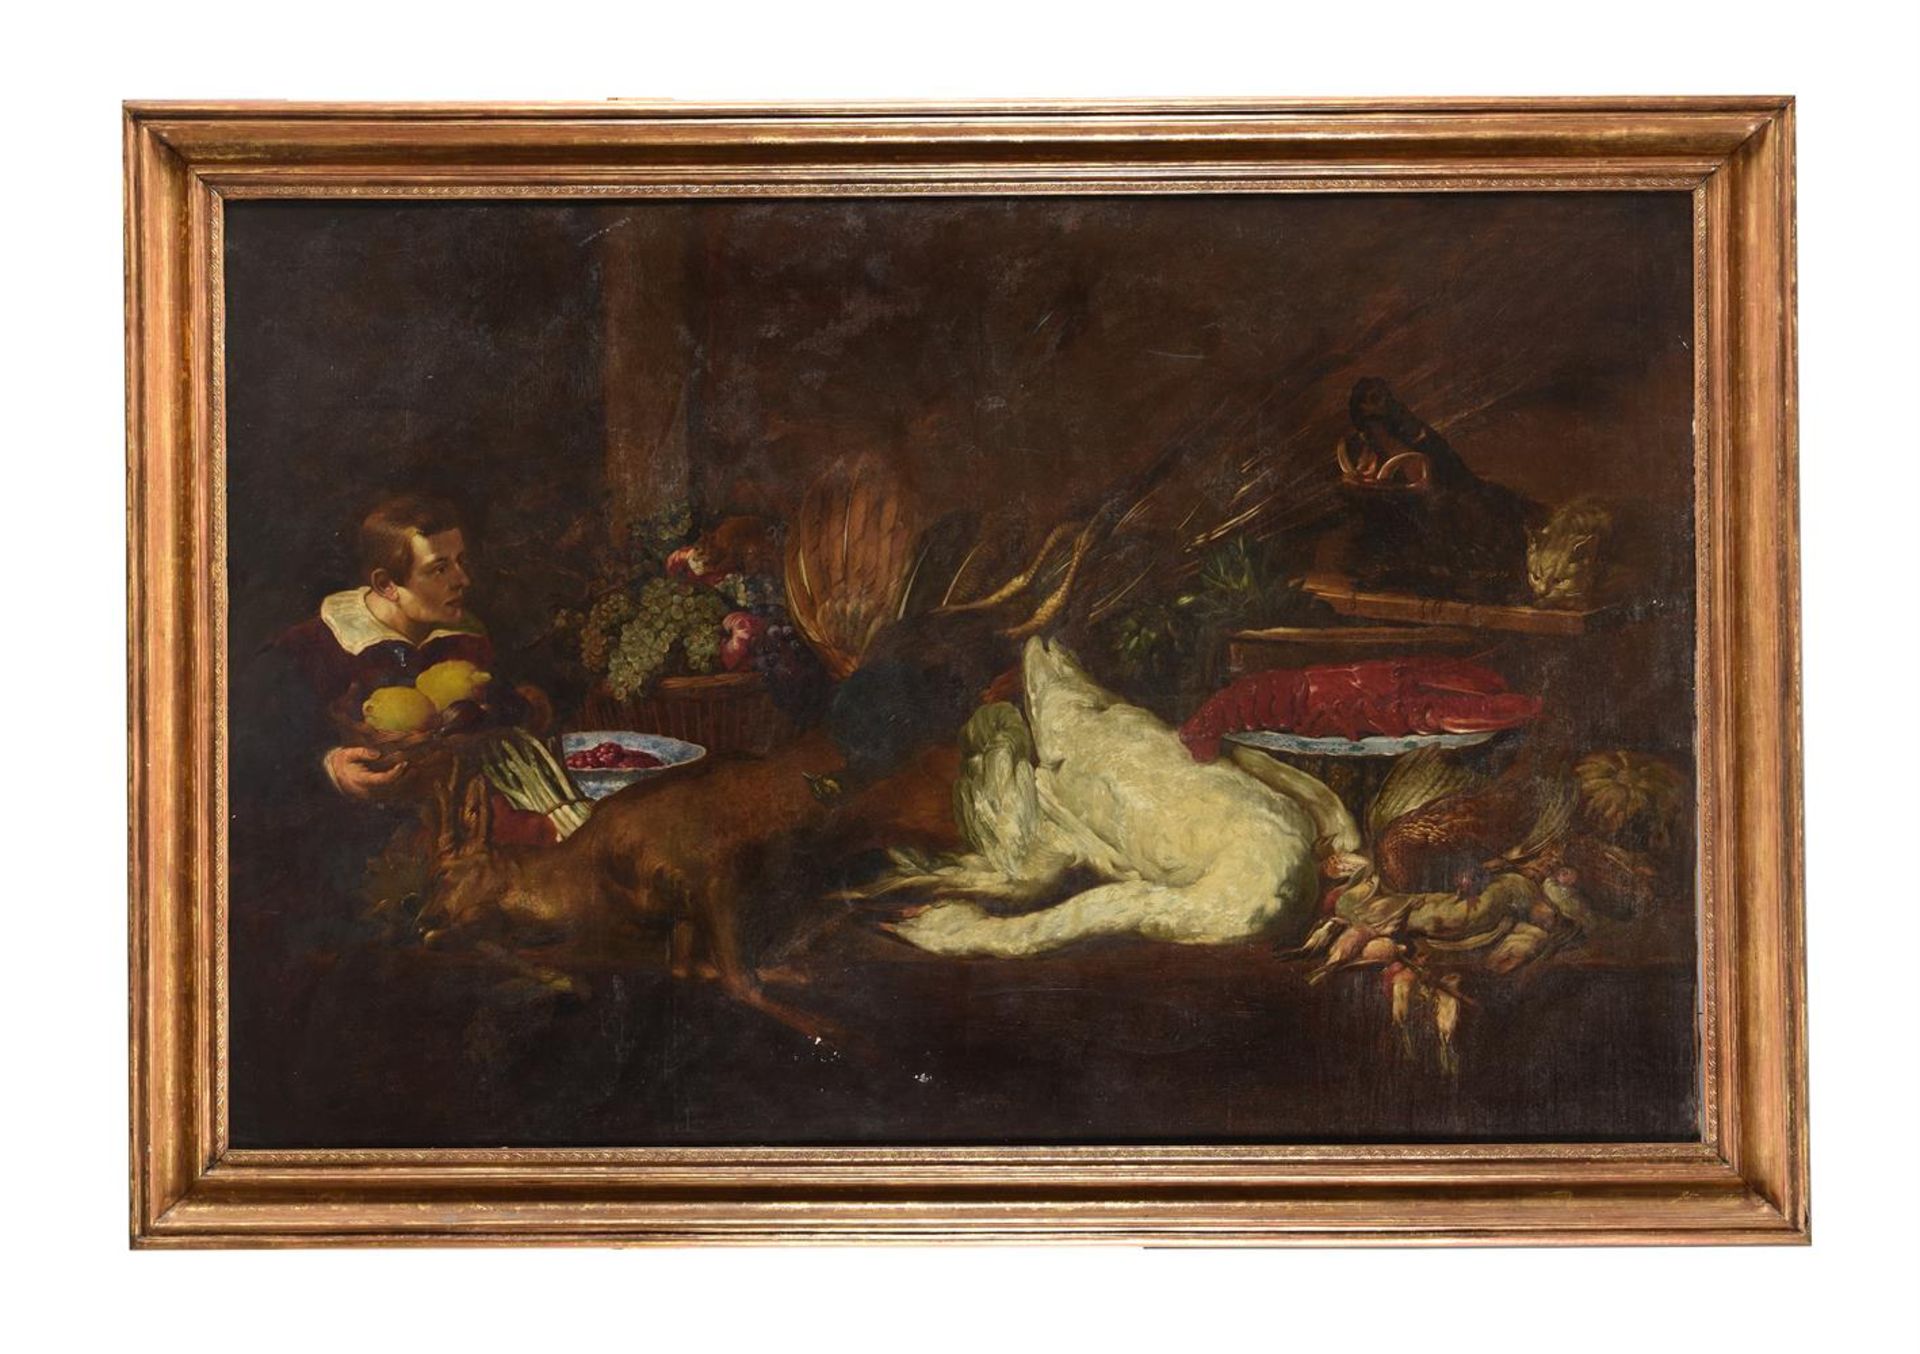 FOLLOWER OF FRANS SNYDERS, STILL LIFE WITH GAME - Image 2 of 4